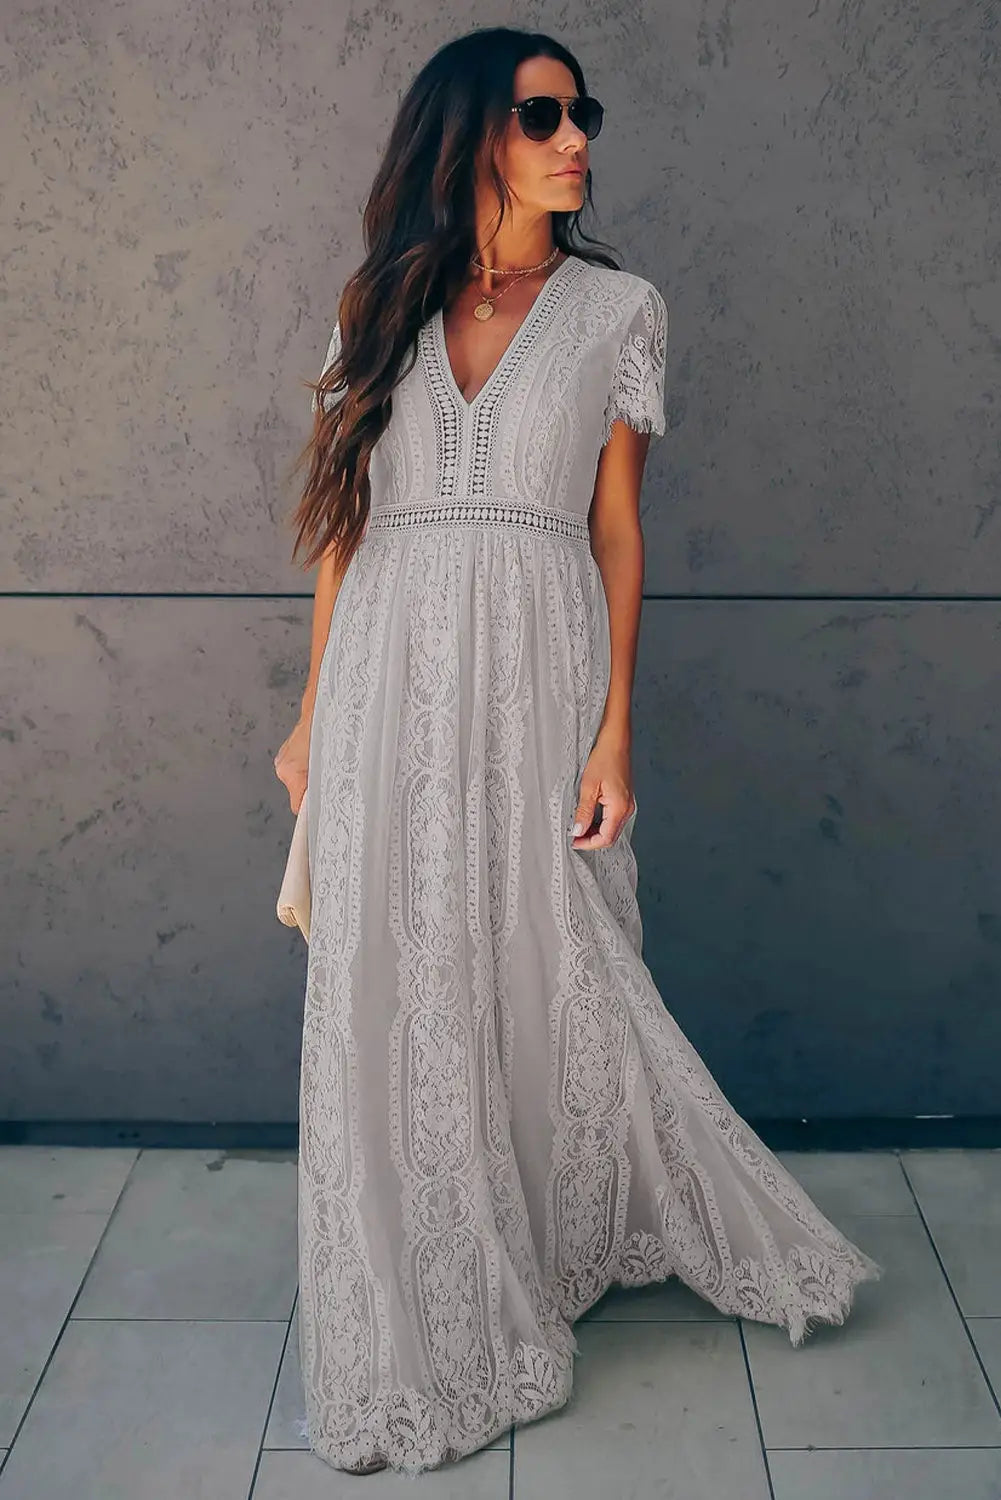 White blue fill your heart lace maxi dress - dresses